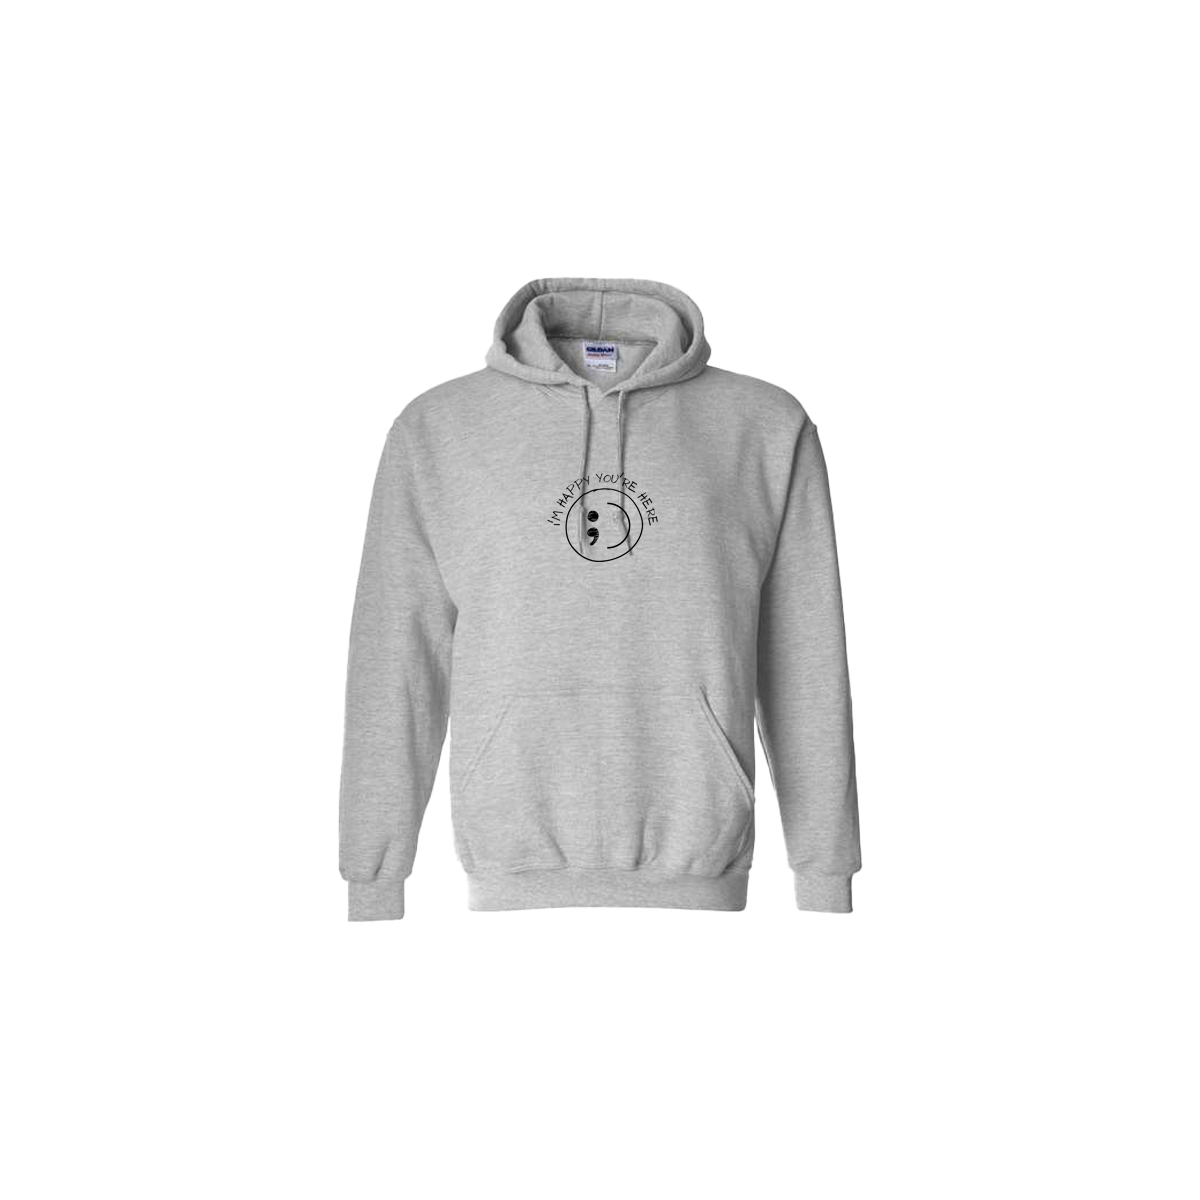 I'm Happy You're Here Embroidered Grey Hoodie - Mental Health Awareness Clothing